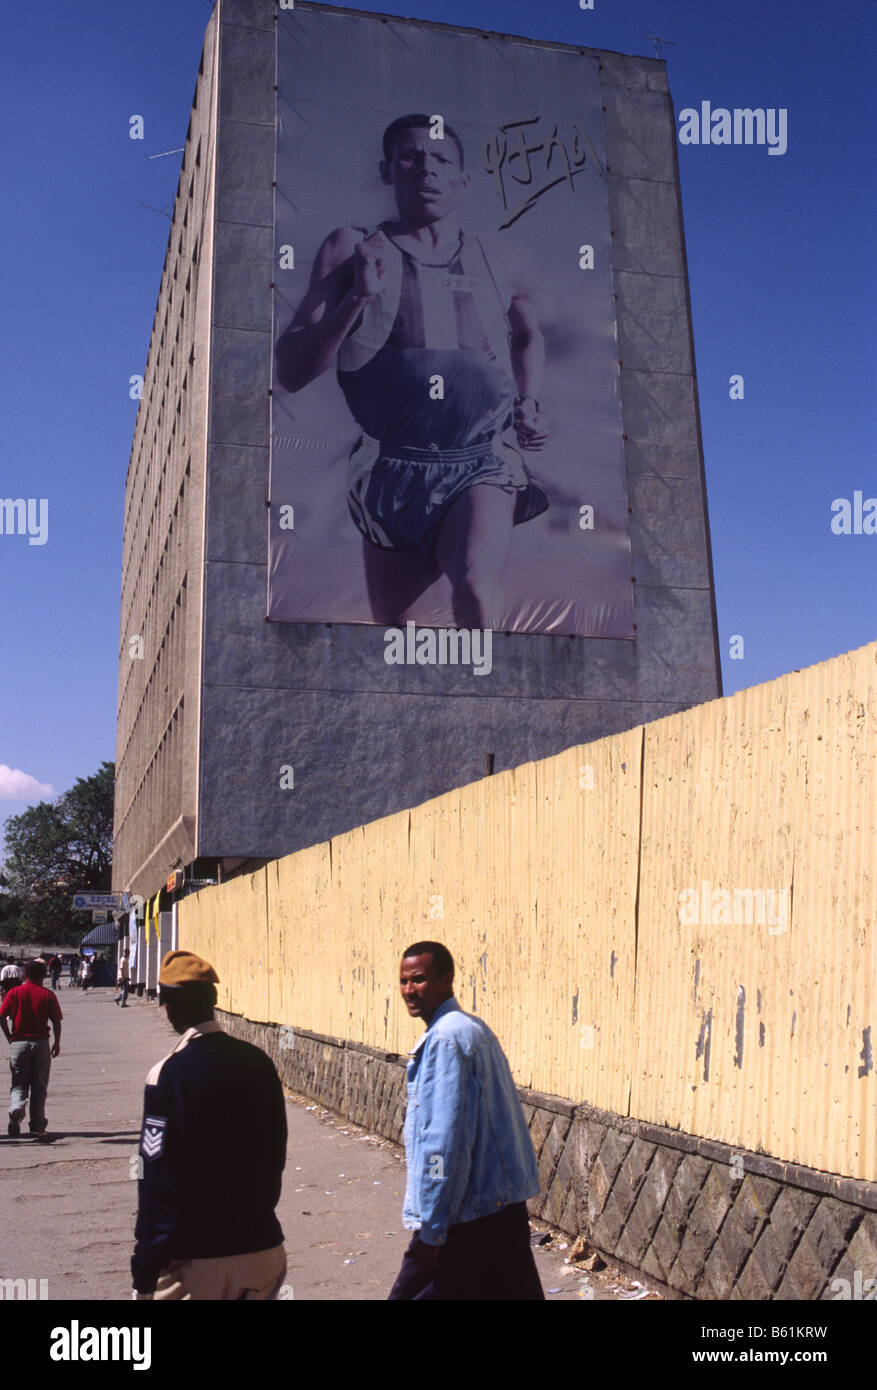 An giant poster hangs on a building of the long distance runner and national hero of Ethiopia Haile Gabre Selassie Stock Photo